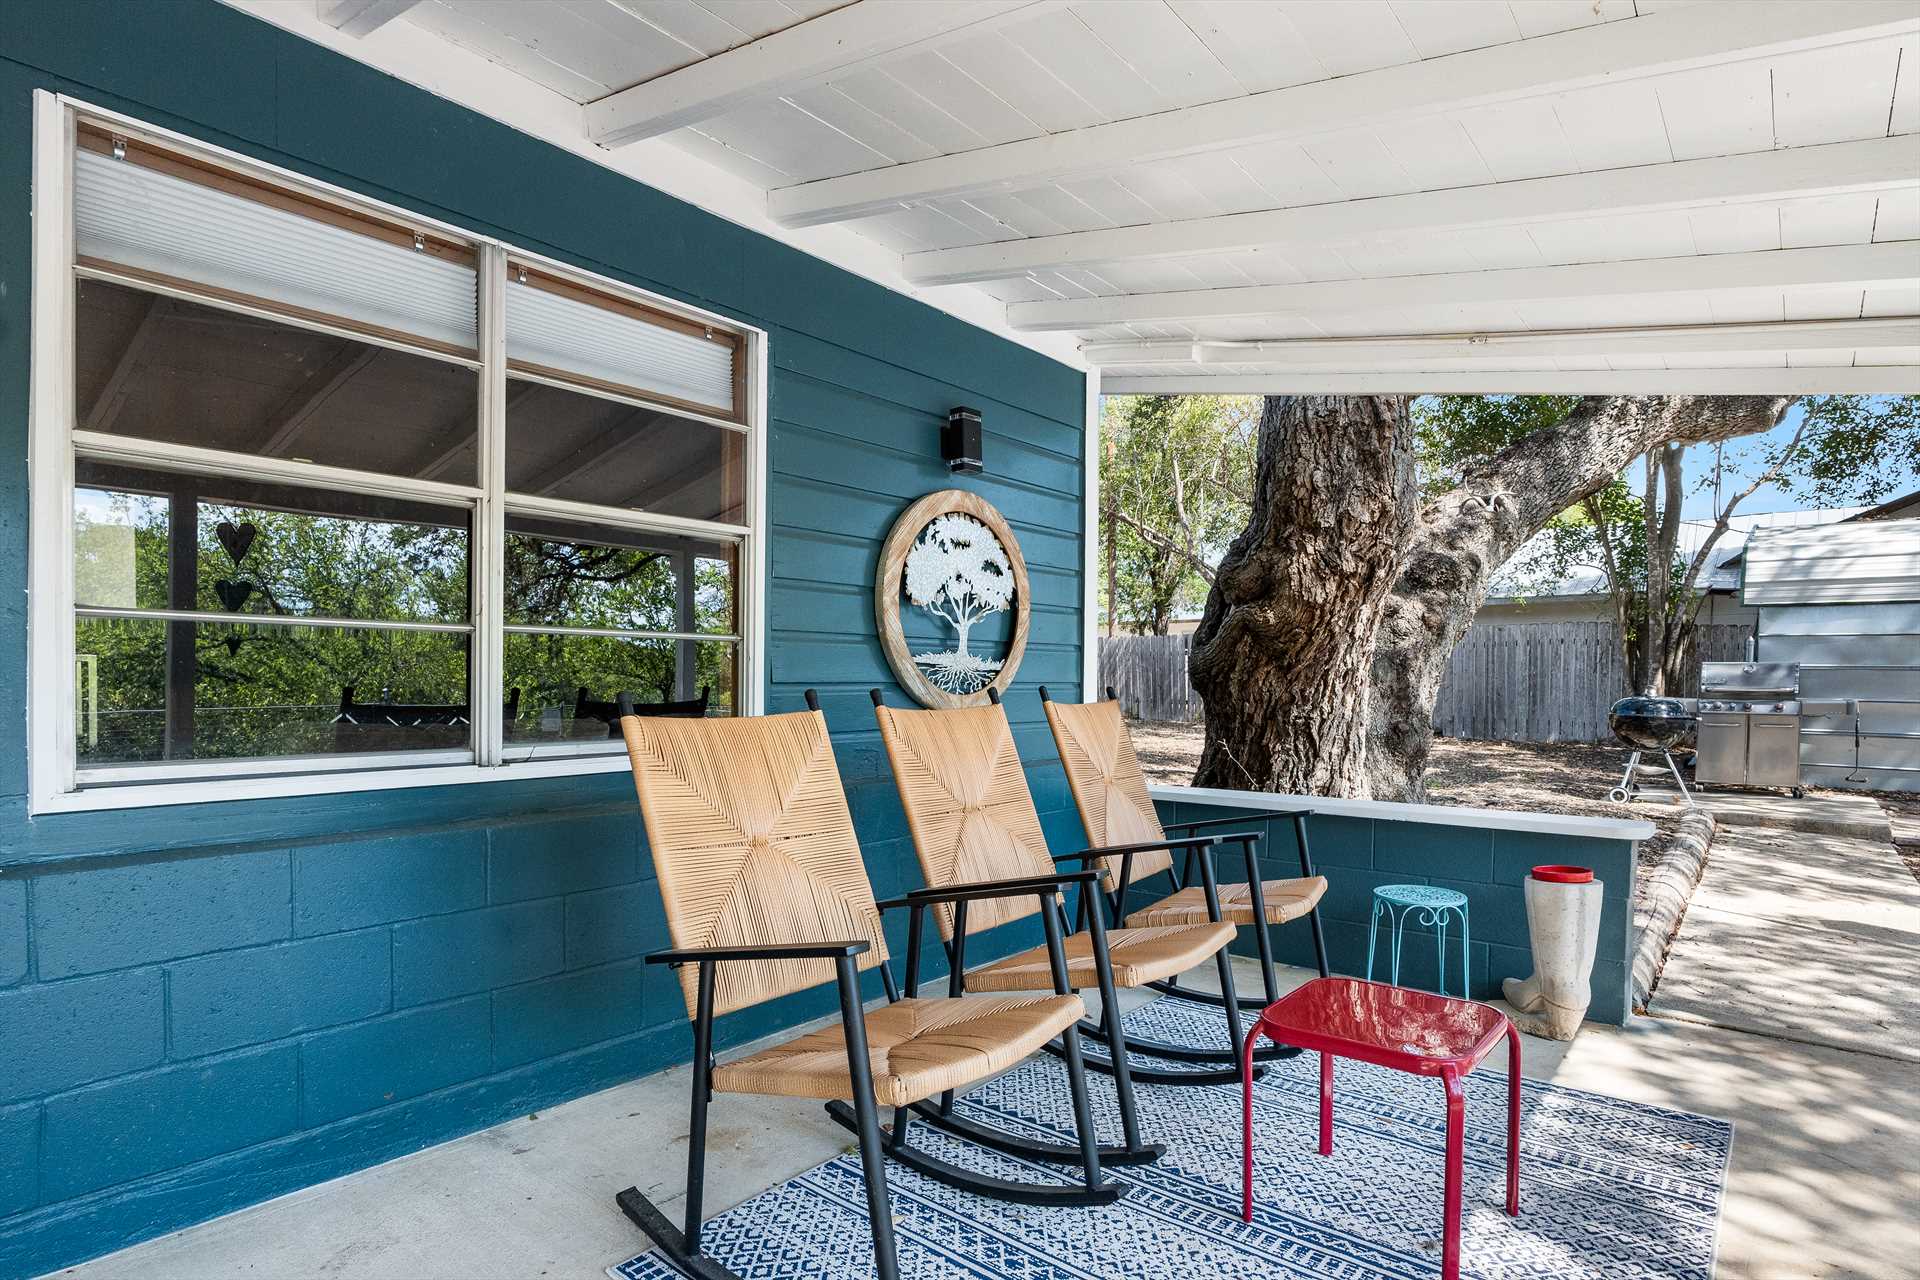                                                 The rocking chair corner of the porch is a great place to sip morning coffee, or cap off your Hill Country day with a glass of wine.